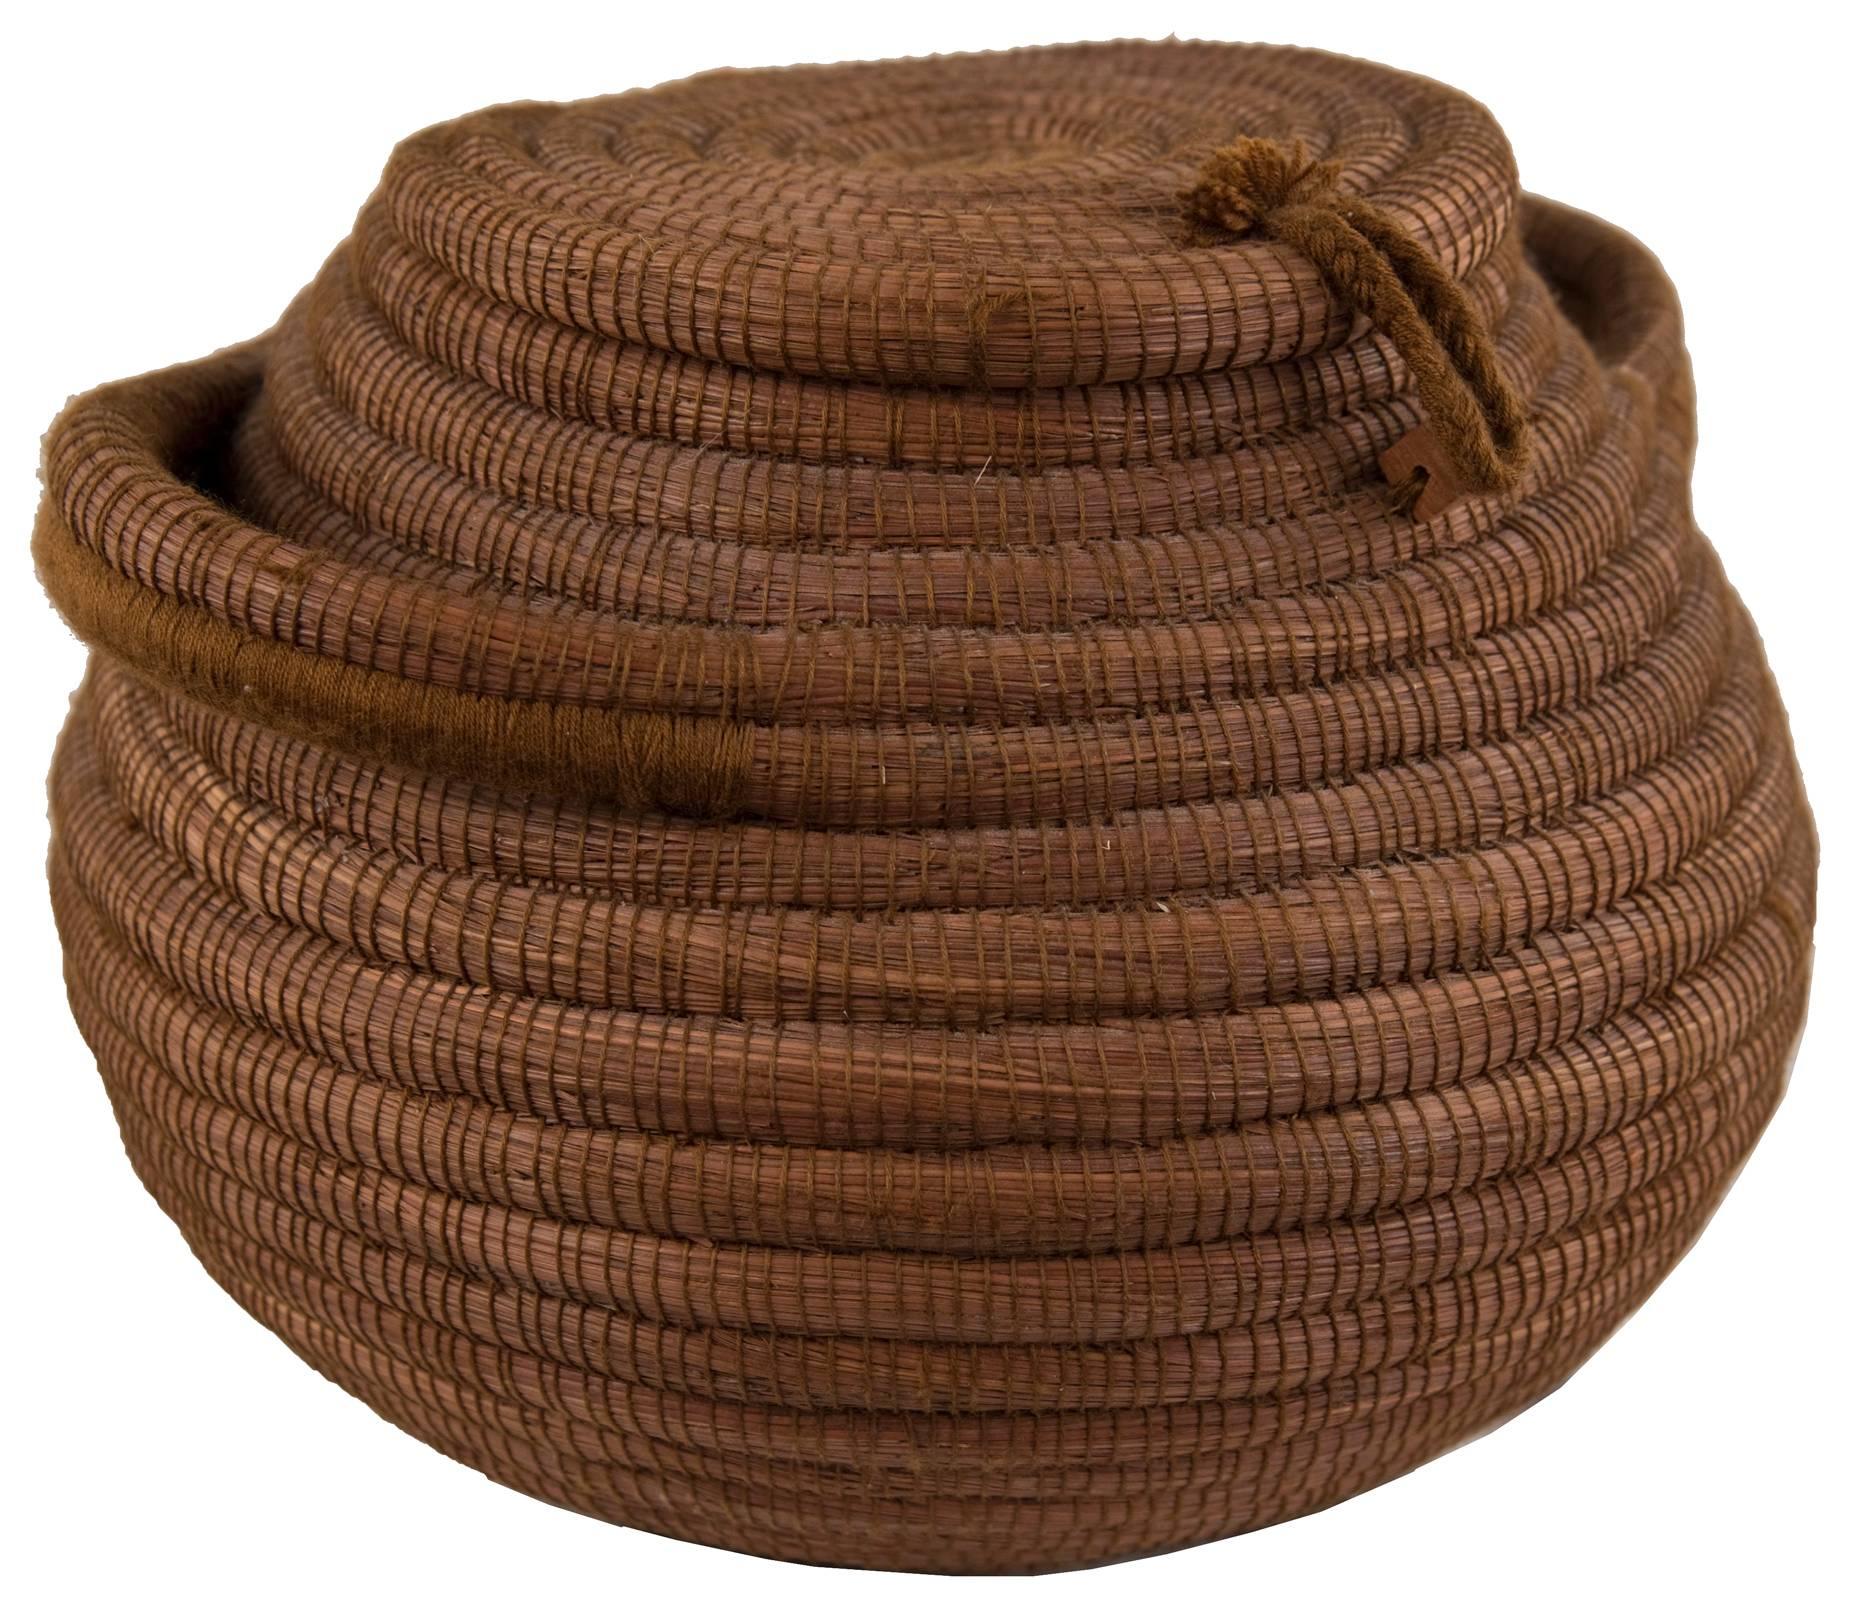 Early 19th century papago woven coil basket, woven from pine needles, with hinged lid above a spreading globular-form shape with double body handles, which have been woven into body structure for support. Constructed of woven pine needles.